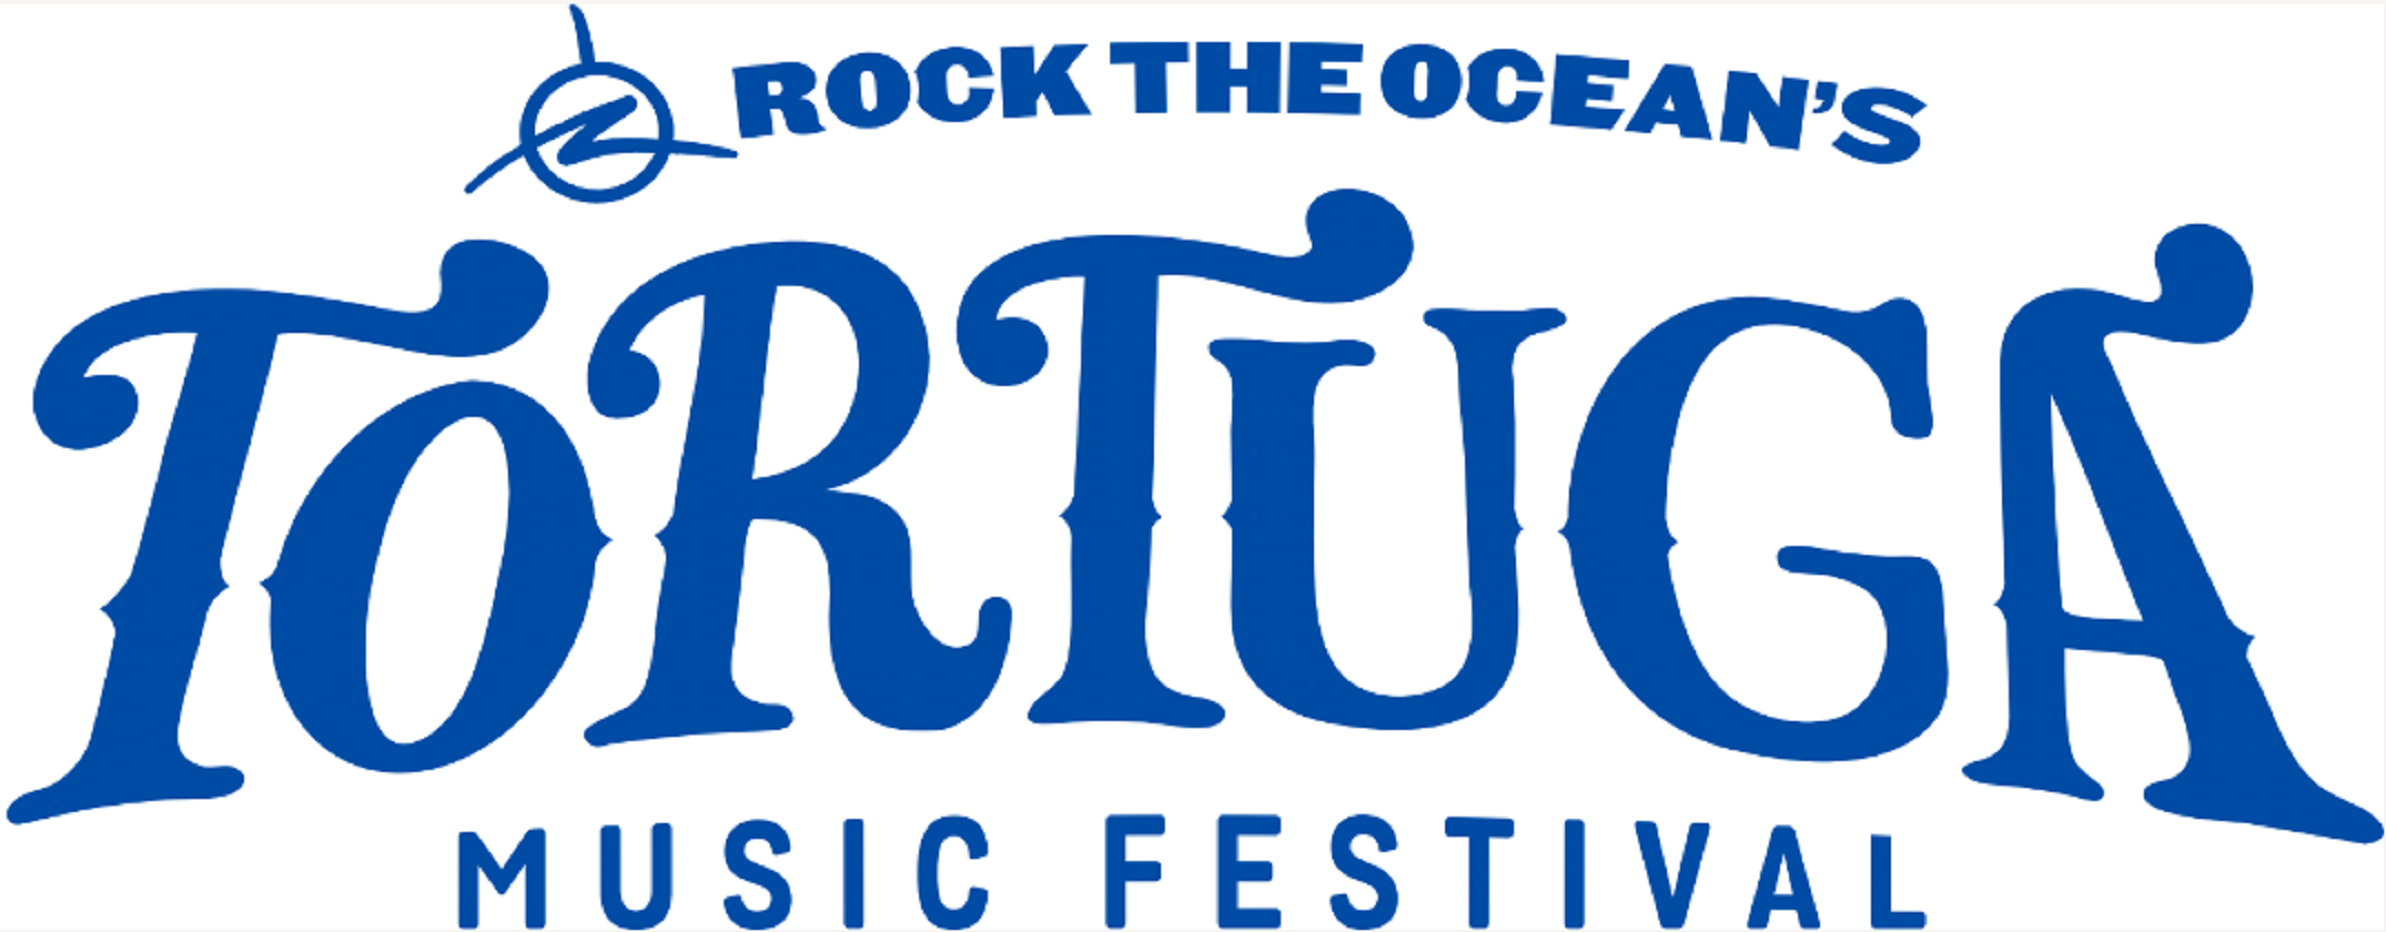 Tortuga Music Festival Brings Country’s Top Artists and Ocean Conservation to Ft. Lauderdale